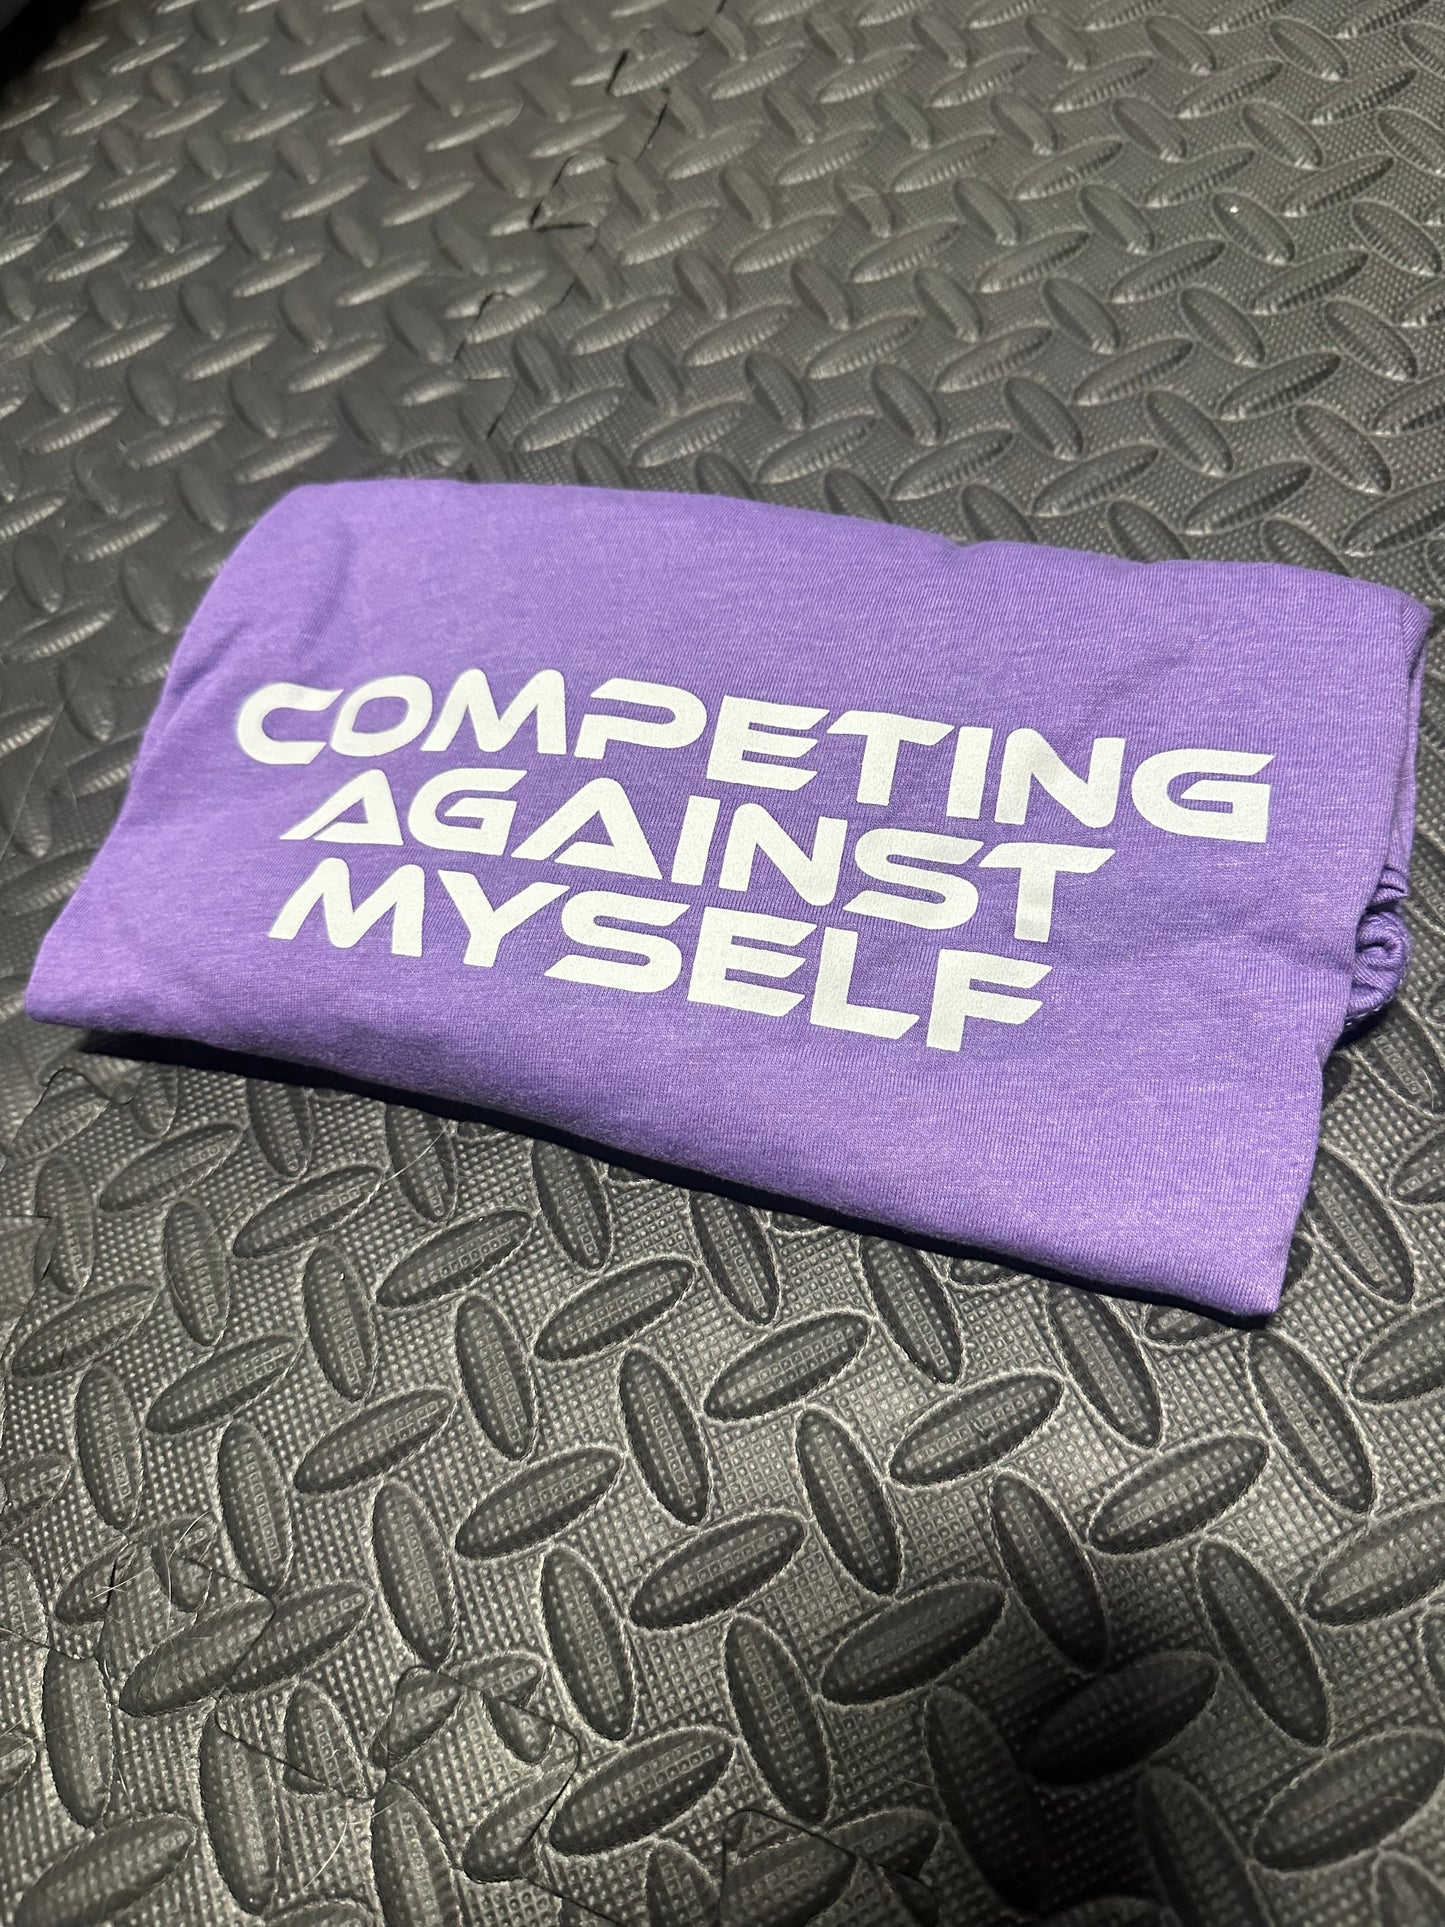 Motivation Collection #1: Competing Against Myself